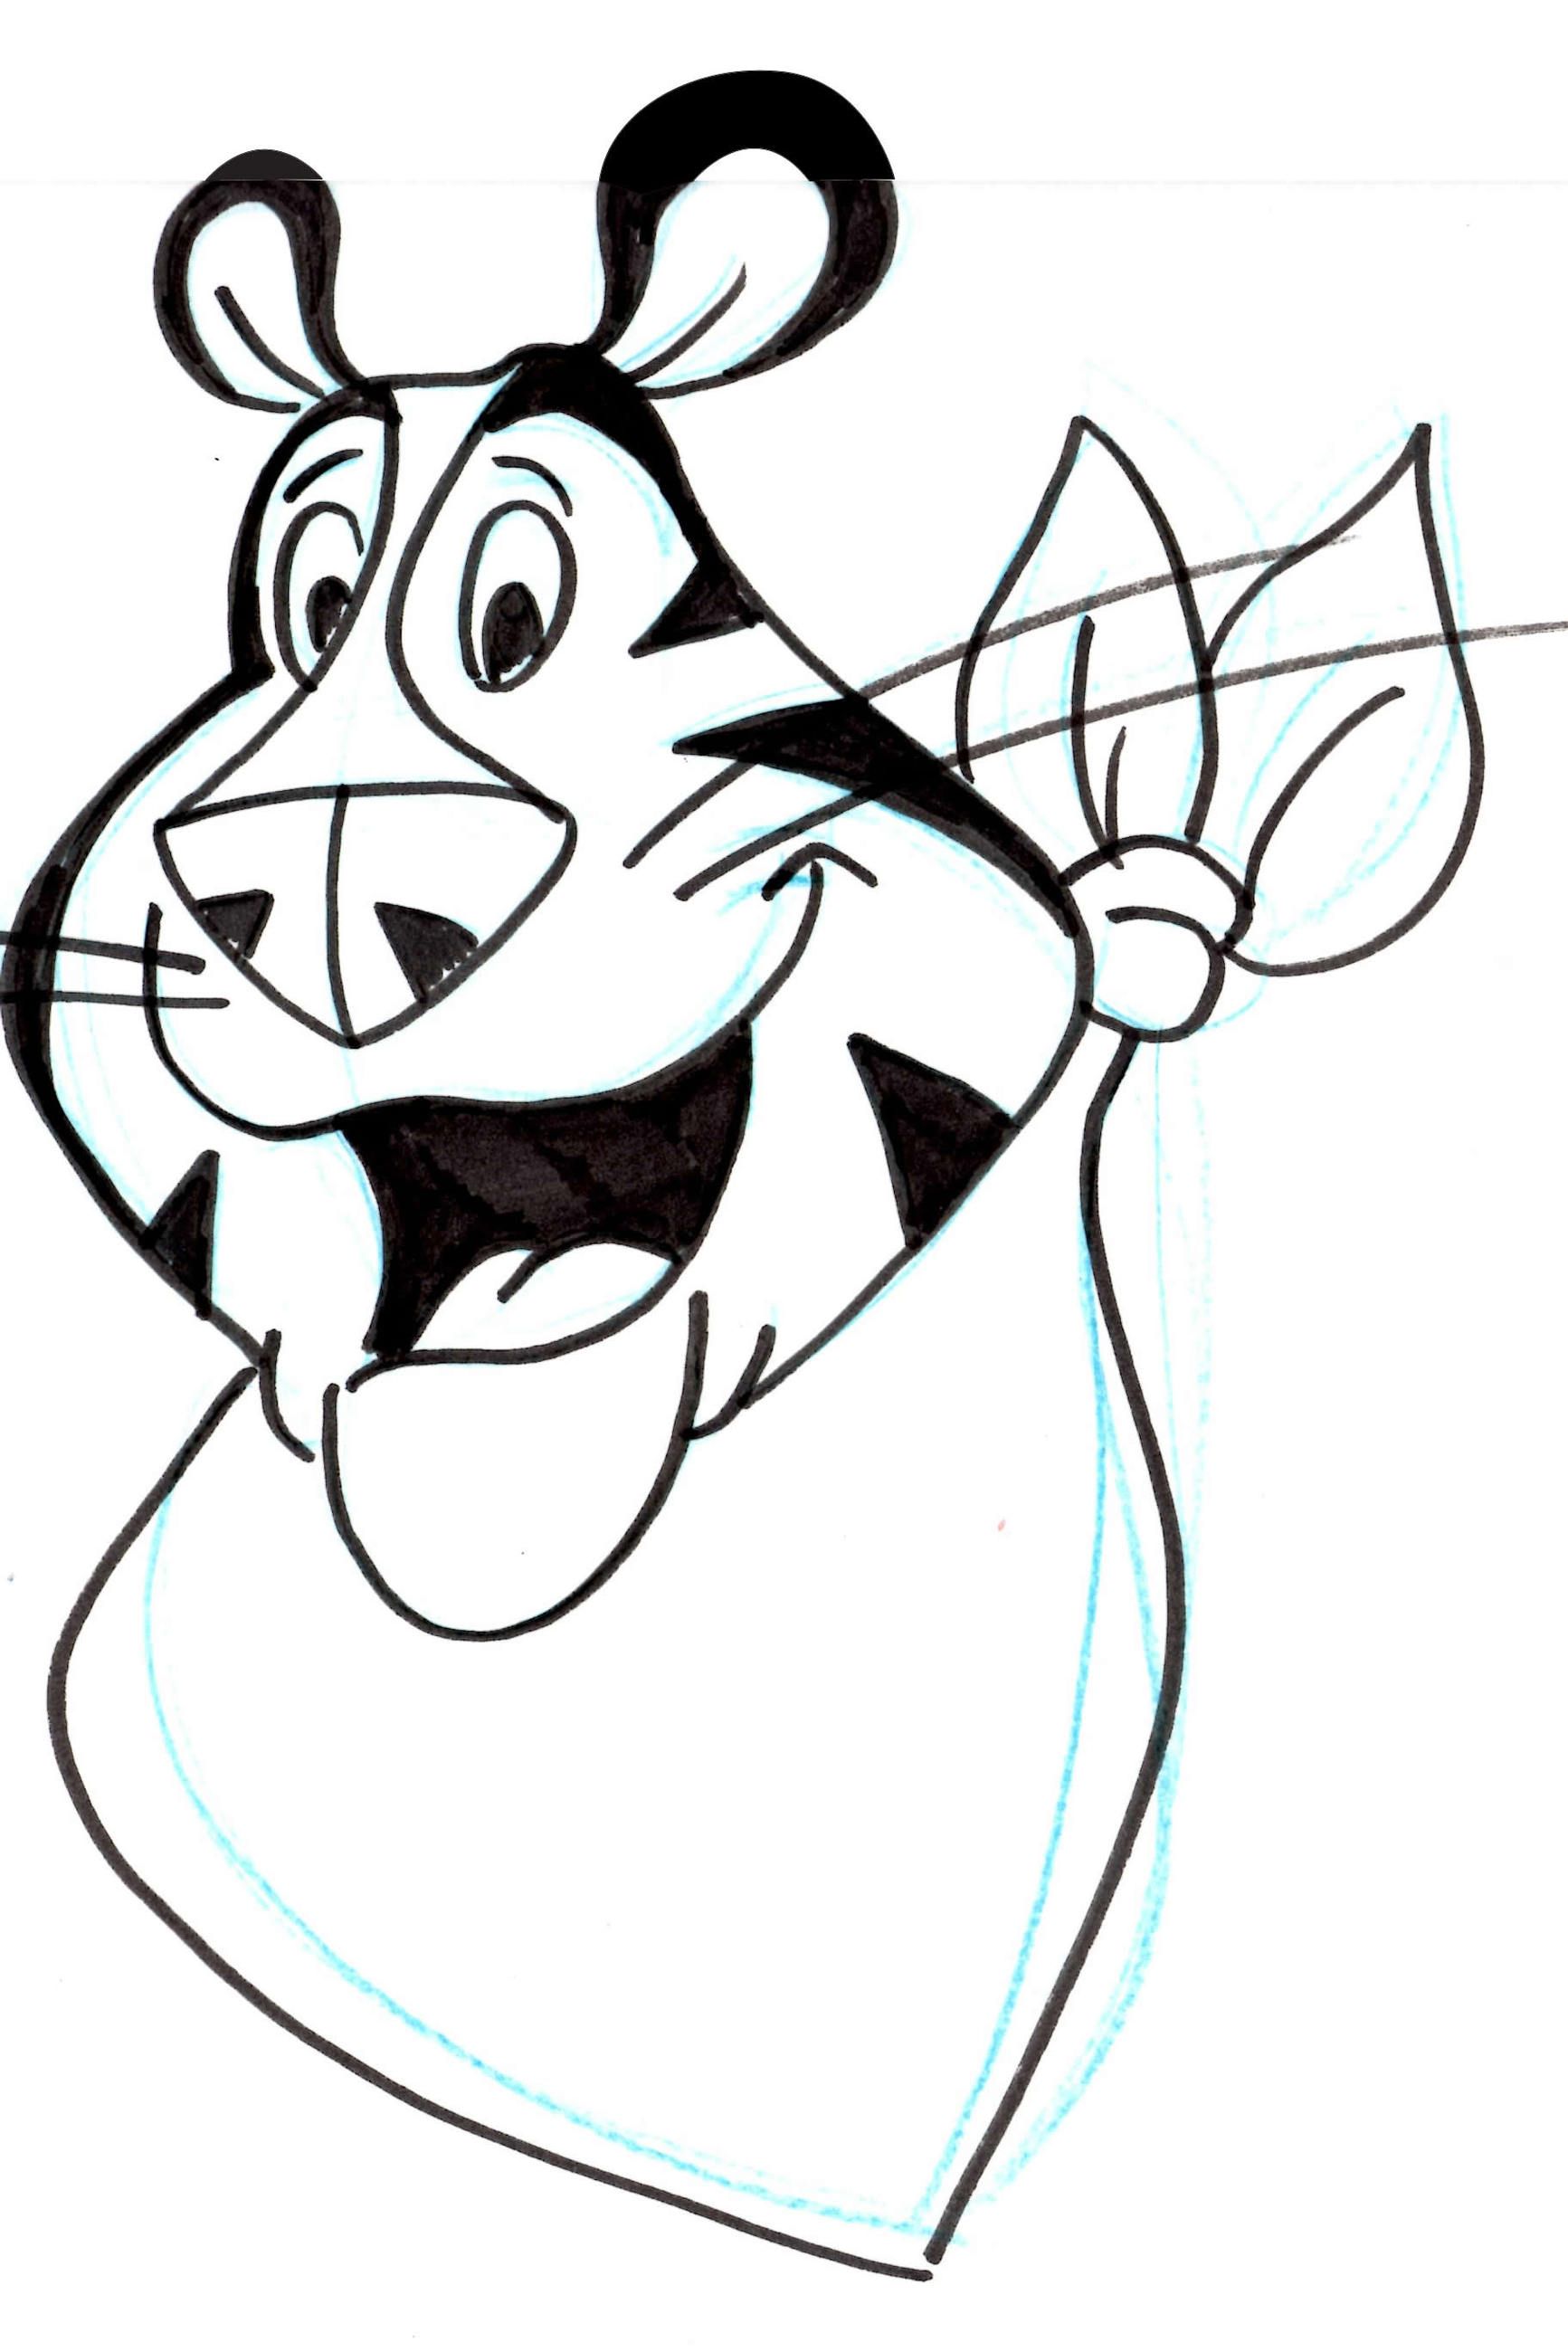 Tiger Outline Drawing Clipart - Free to use Clip Art Resource